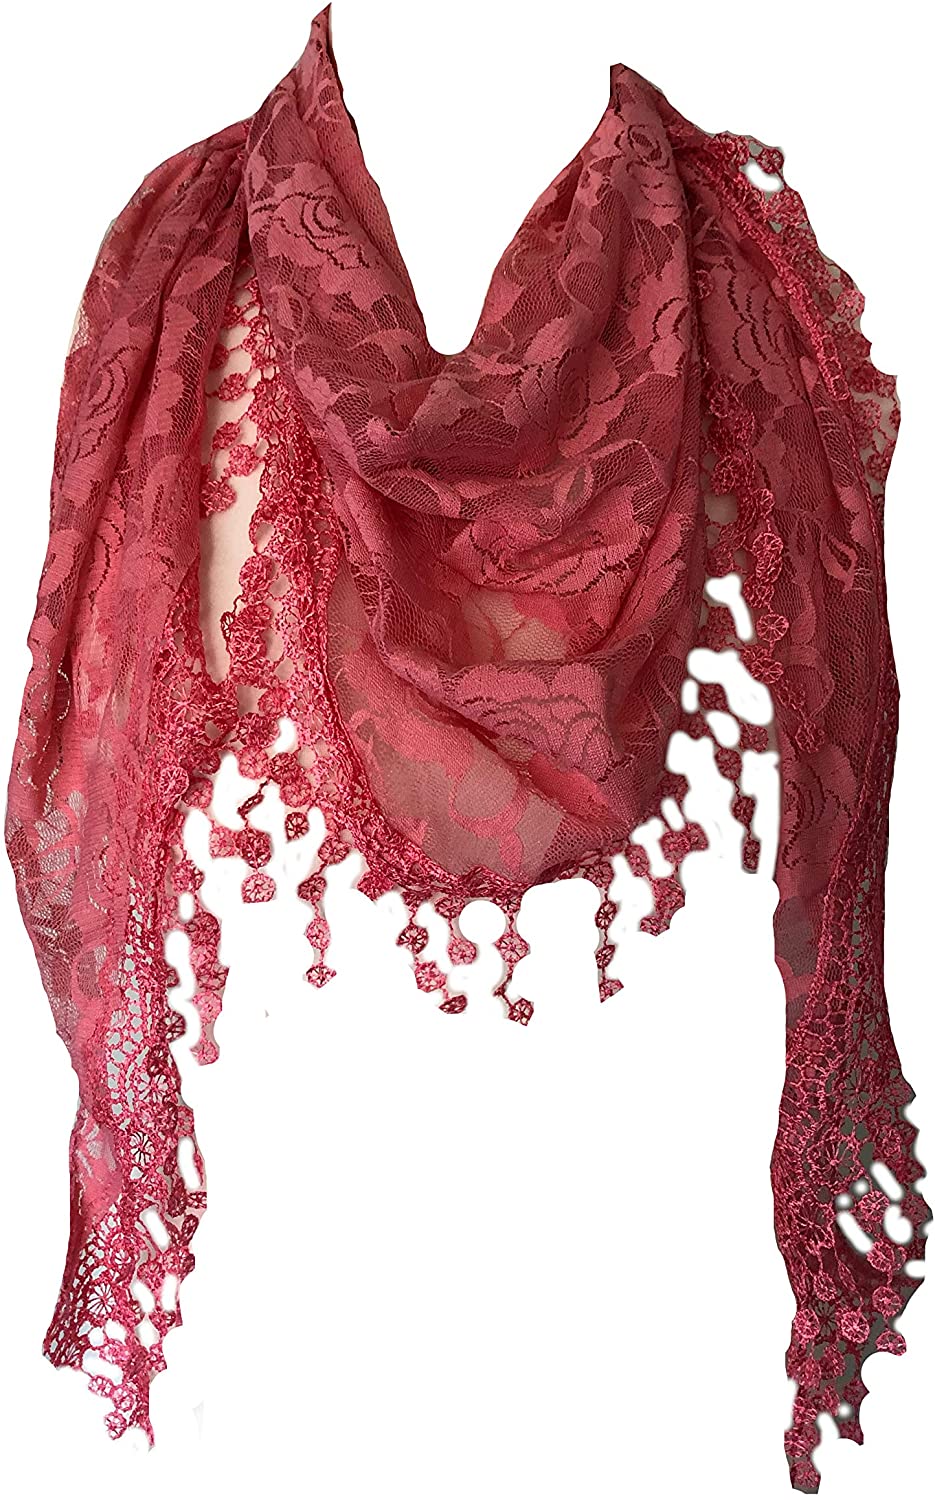 Pamper Yourself Now Pink Roses Designs lace Triangle Scarf. a Lovely Fashion Item. Fantastic Gift